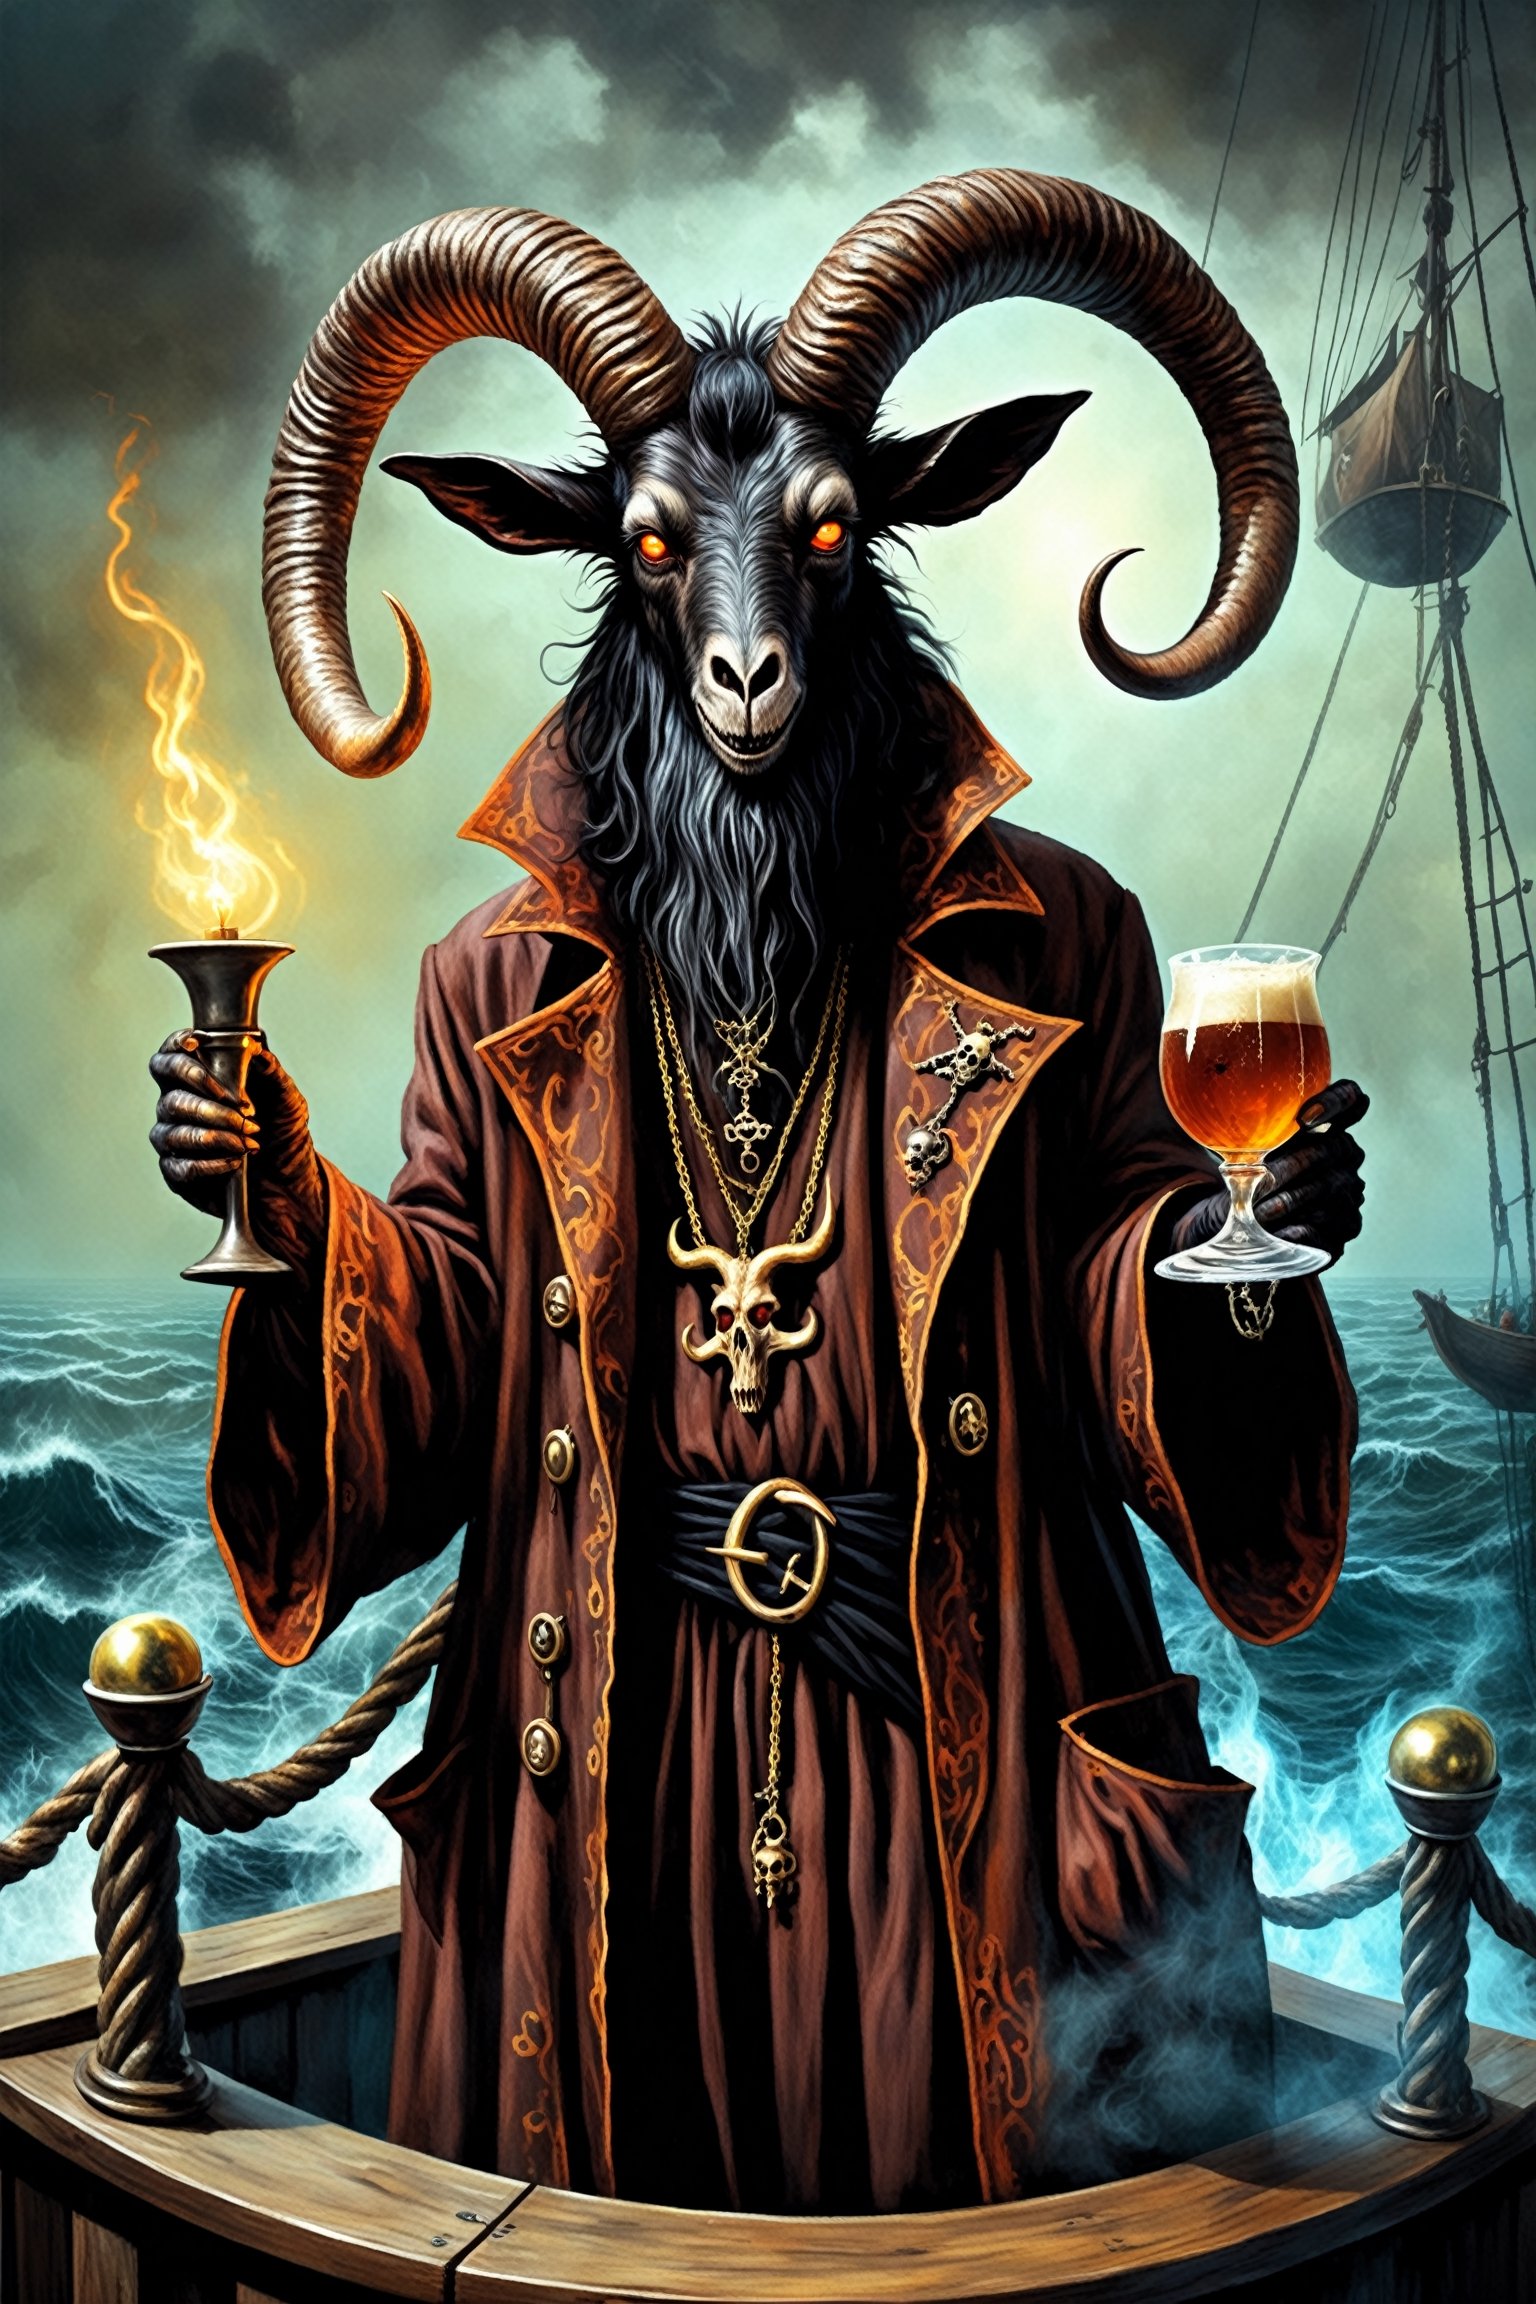 1 man,cool monster,
Baphomet, a demonic being, black goat head demon, a demon dressed as a pirate, a pentagram painted on it and a tattered coat, exuding a sinister mystery, with glowing eyes and a twisted smile, Baphomet holds a chalice filled with an otherworldly brew. Prowling the deck of a bewitched ship, Baphomet embodies the sinister allure of the pirate and his eternal hunger for souls..,LegendDarkFantasy,pirate,monster, in the style of esao andrews